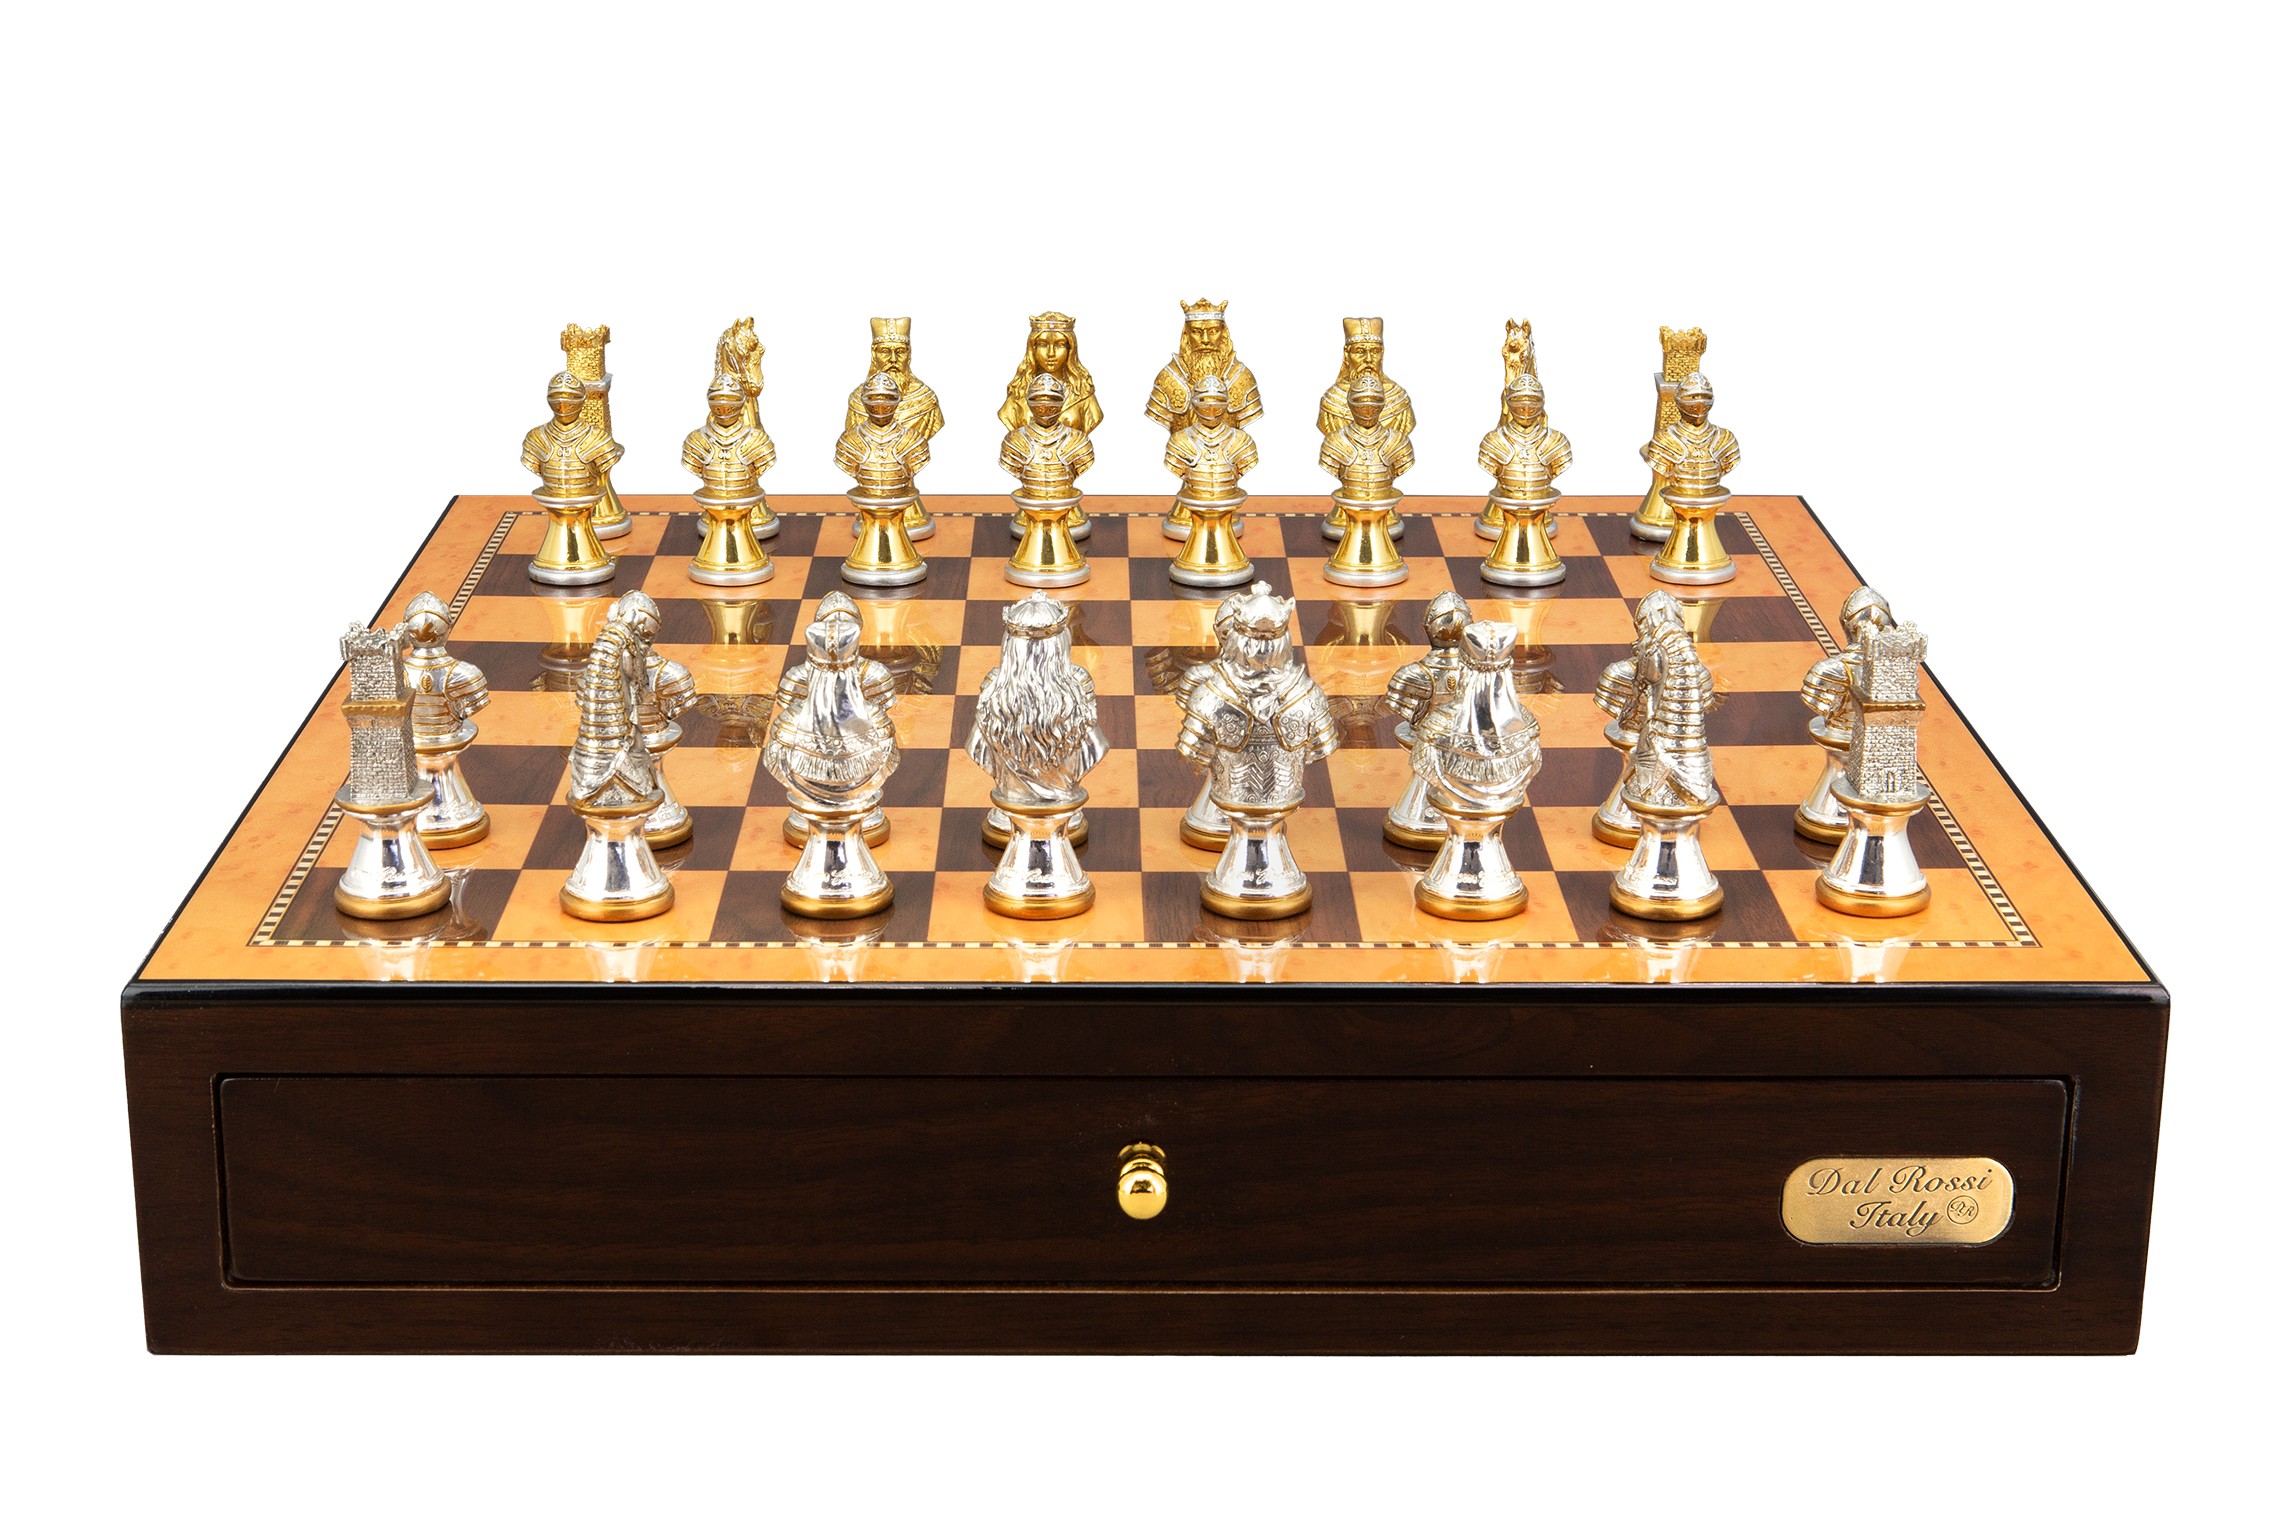 Dal Rossi Italy, Medieval Warriors Metal Chessmen 85mm on a Shiny Walnut Chess Box with two Drawers 18"